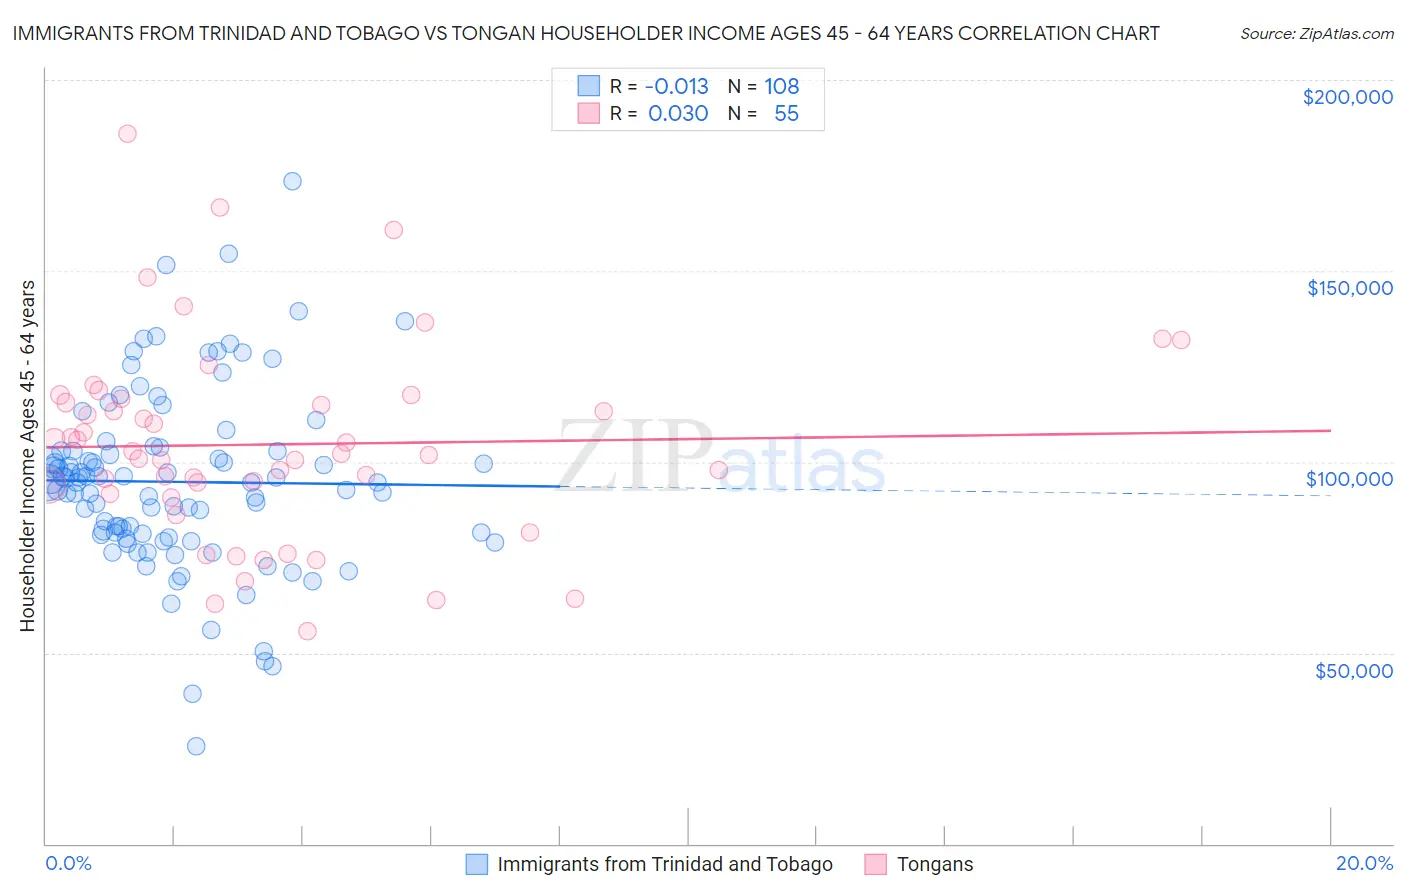 Immigrants from Trinidad and Tobago vs Tongan Householder Income Ages 45 - 64 years